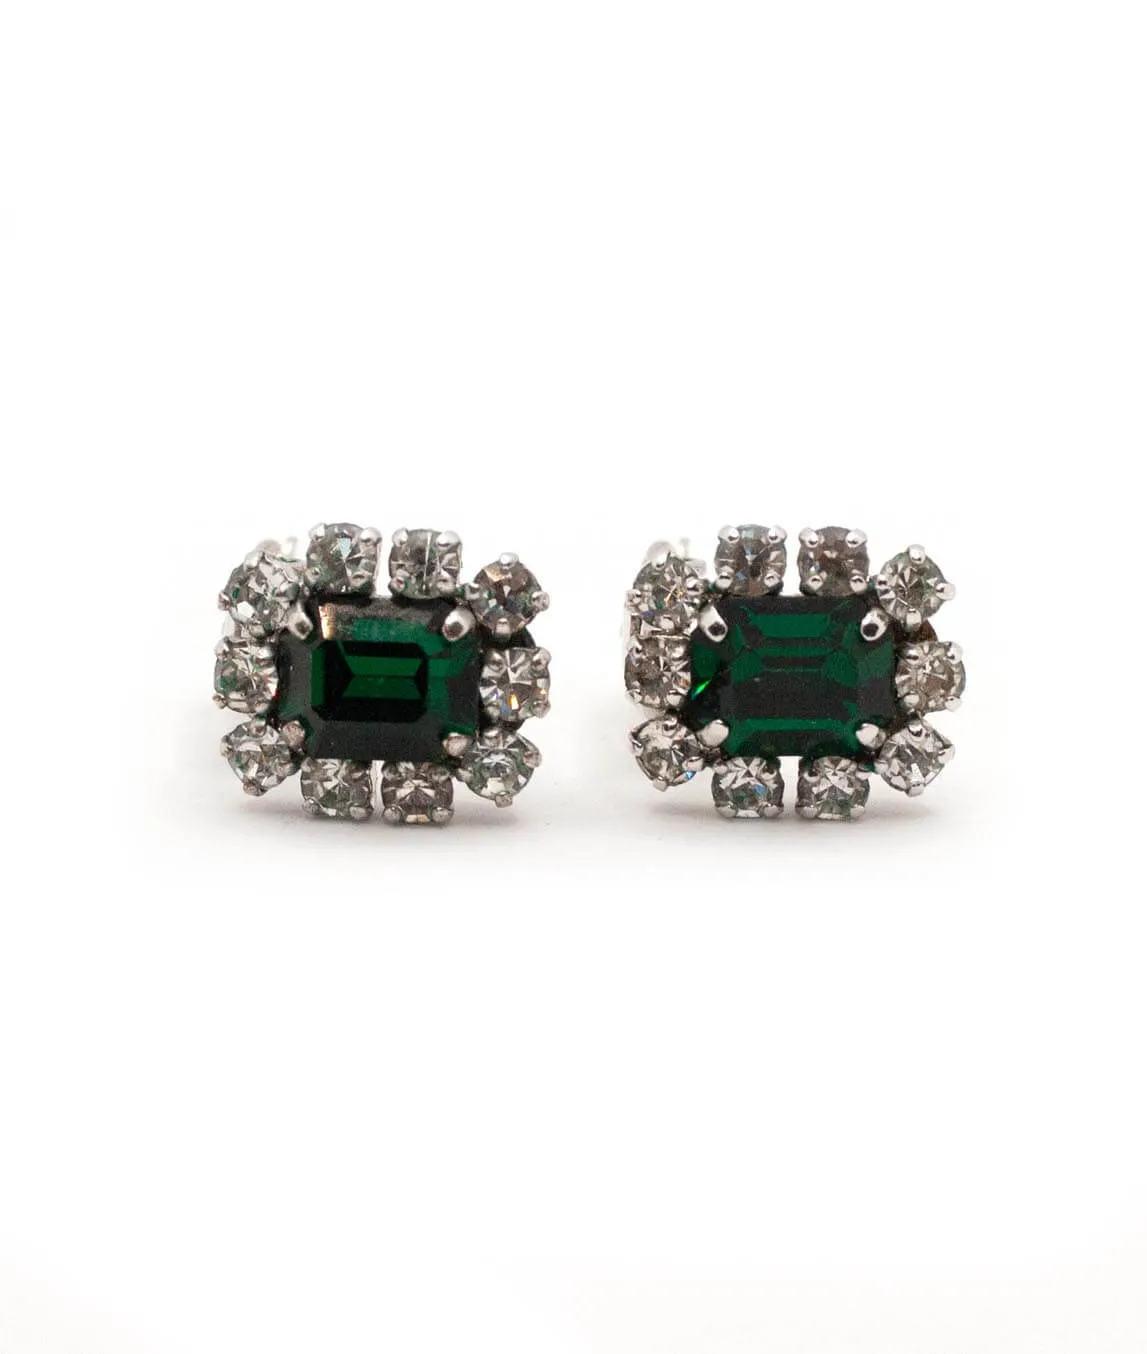 Vintage Christian Dior emerald green cluster earrings